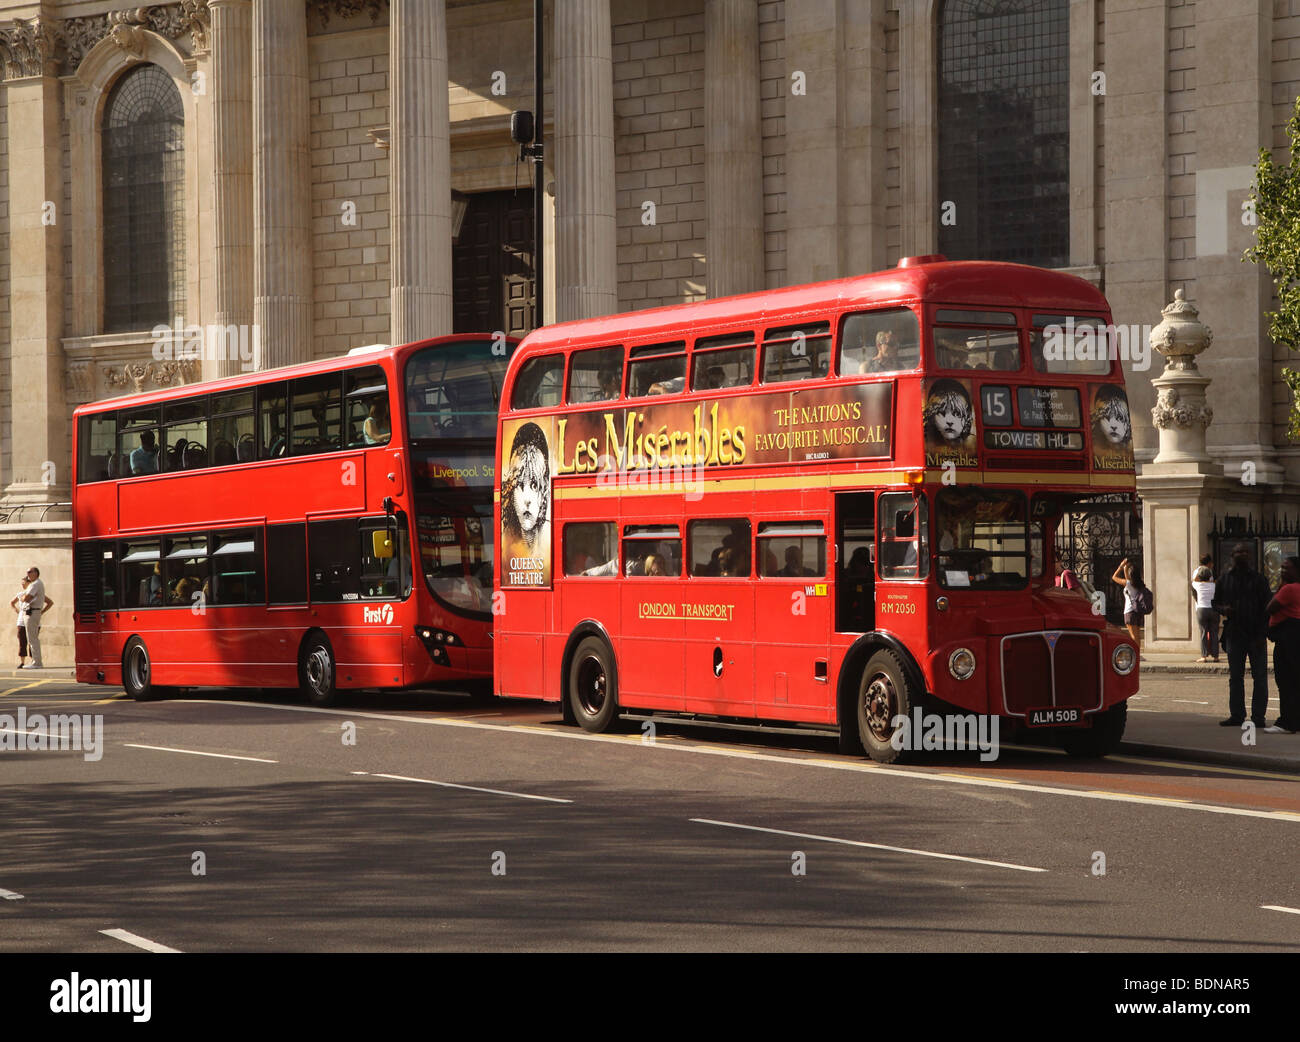 Two London buses stopped at the bus stop picking up passengers Stock Photo